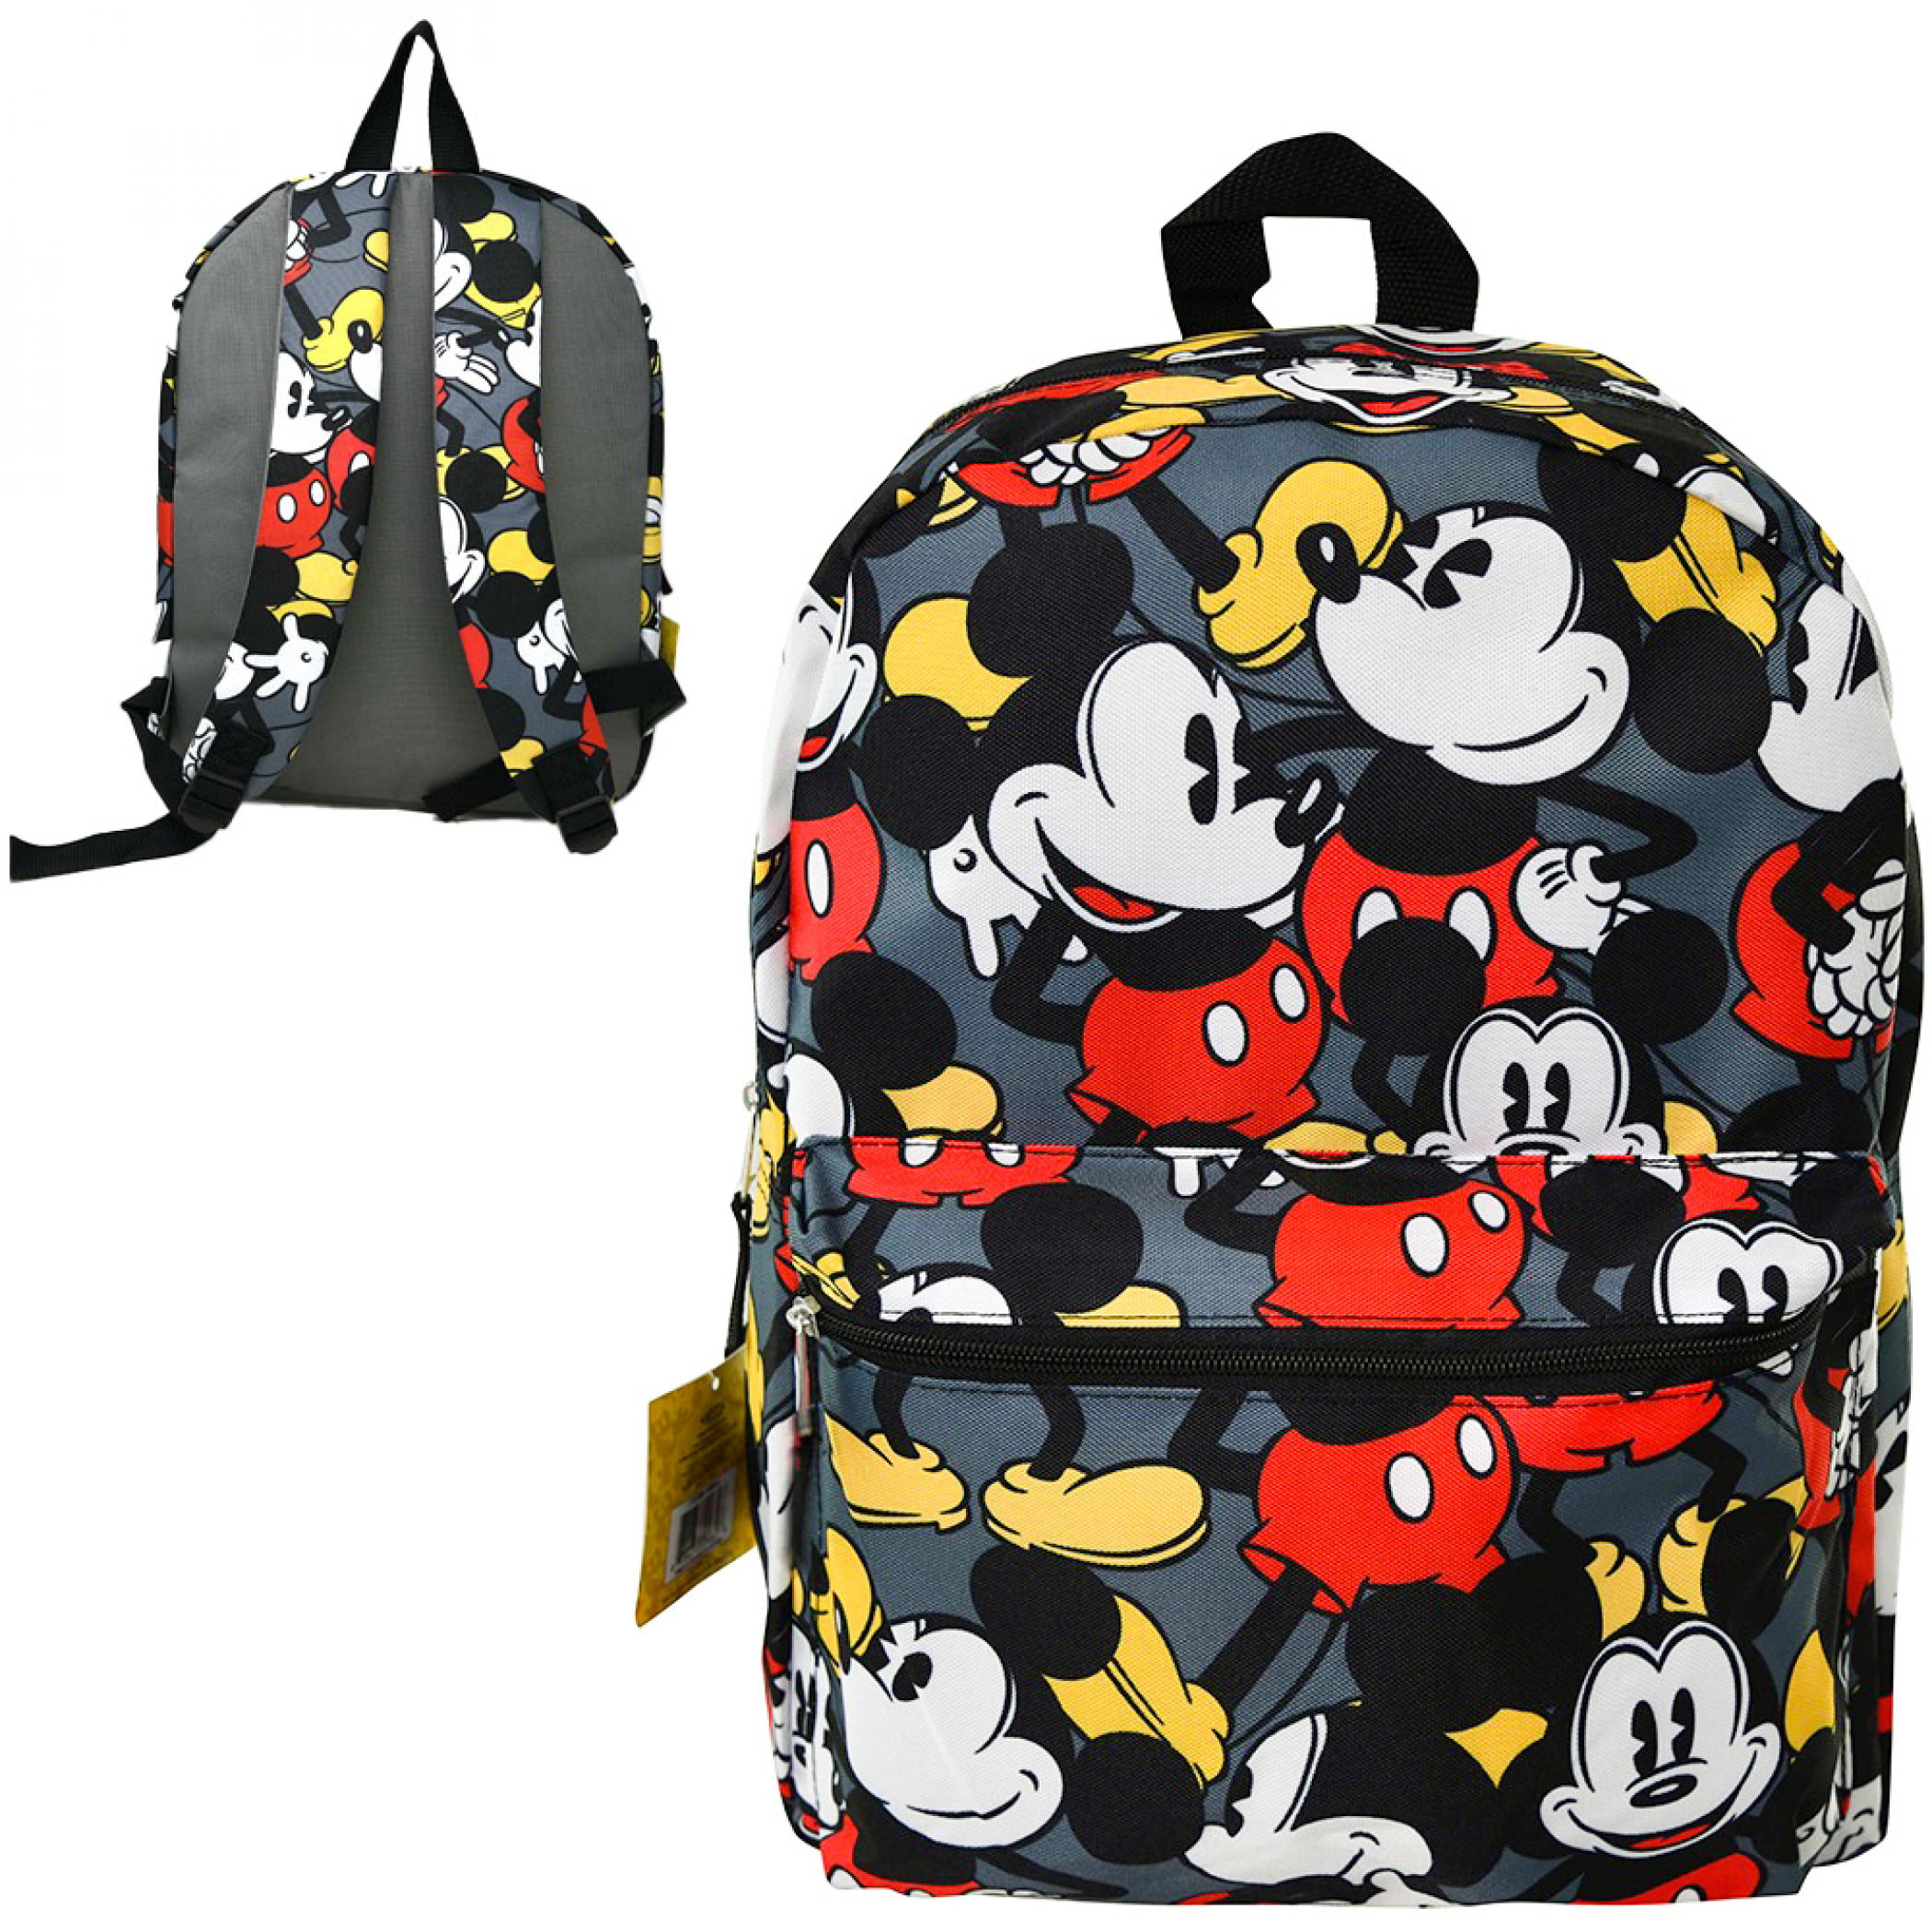 Disney Mickey Mouse White School All Print Book Bag Backpack 16" for Kids